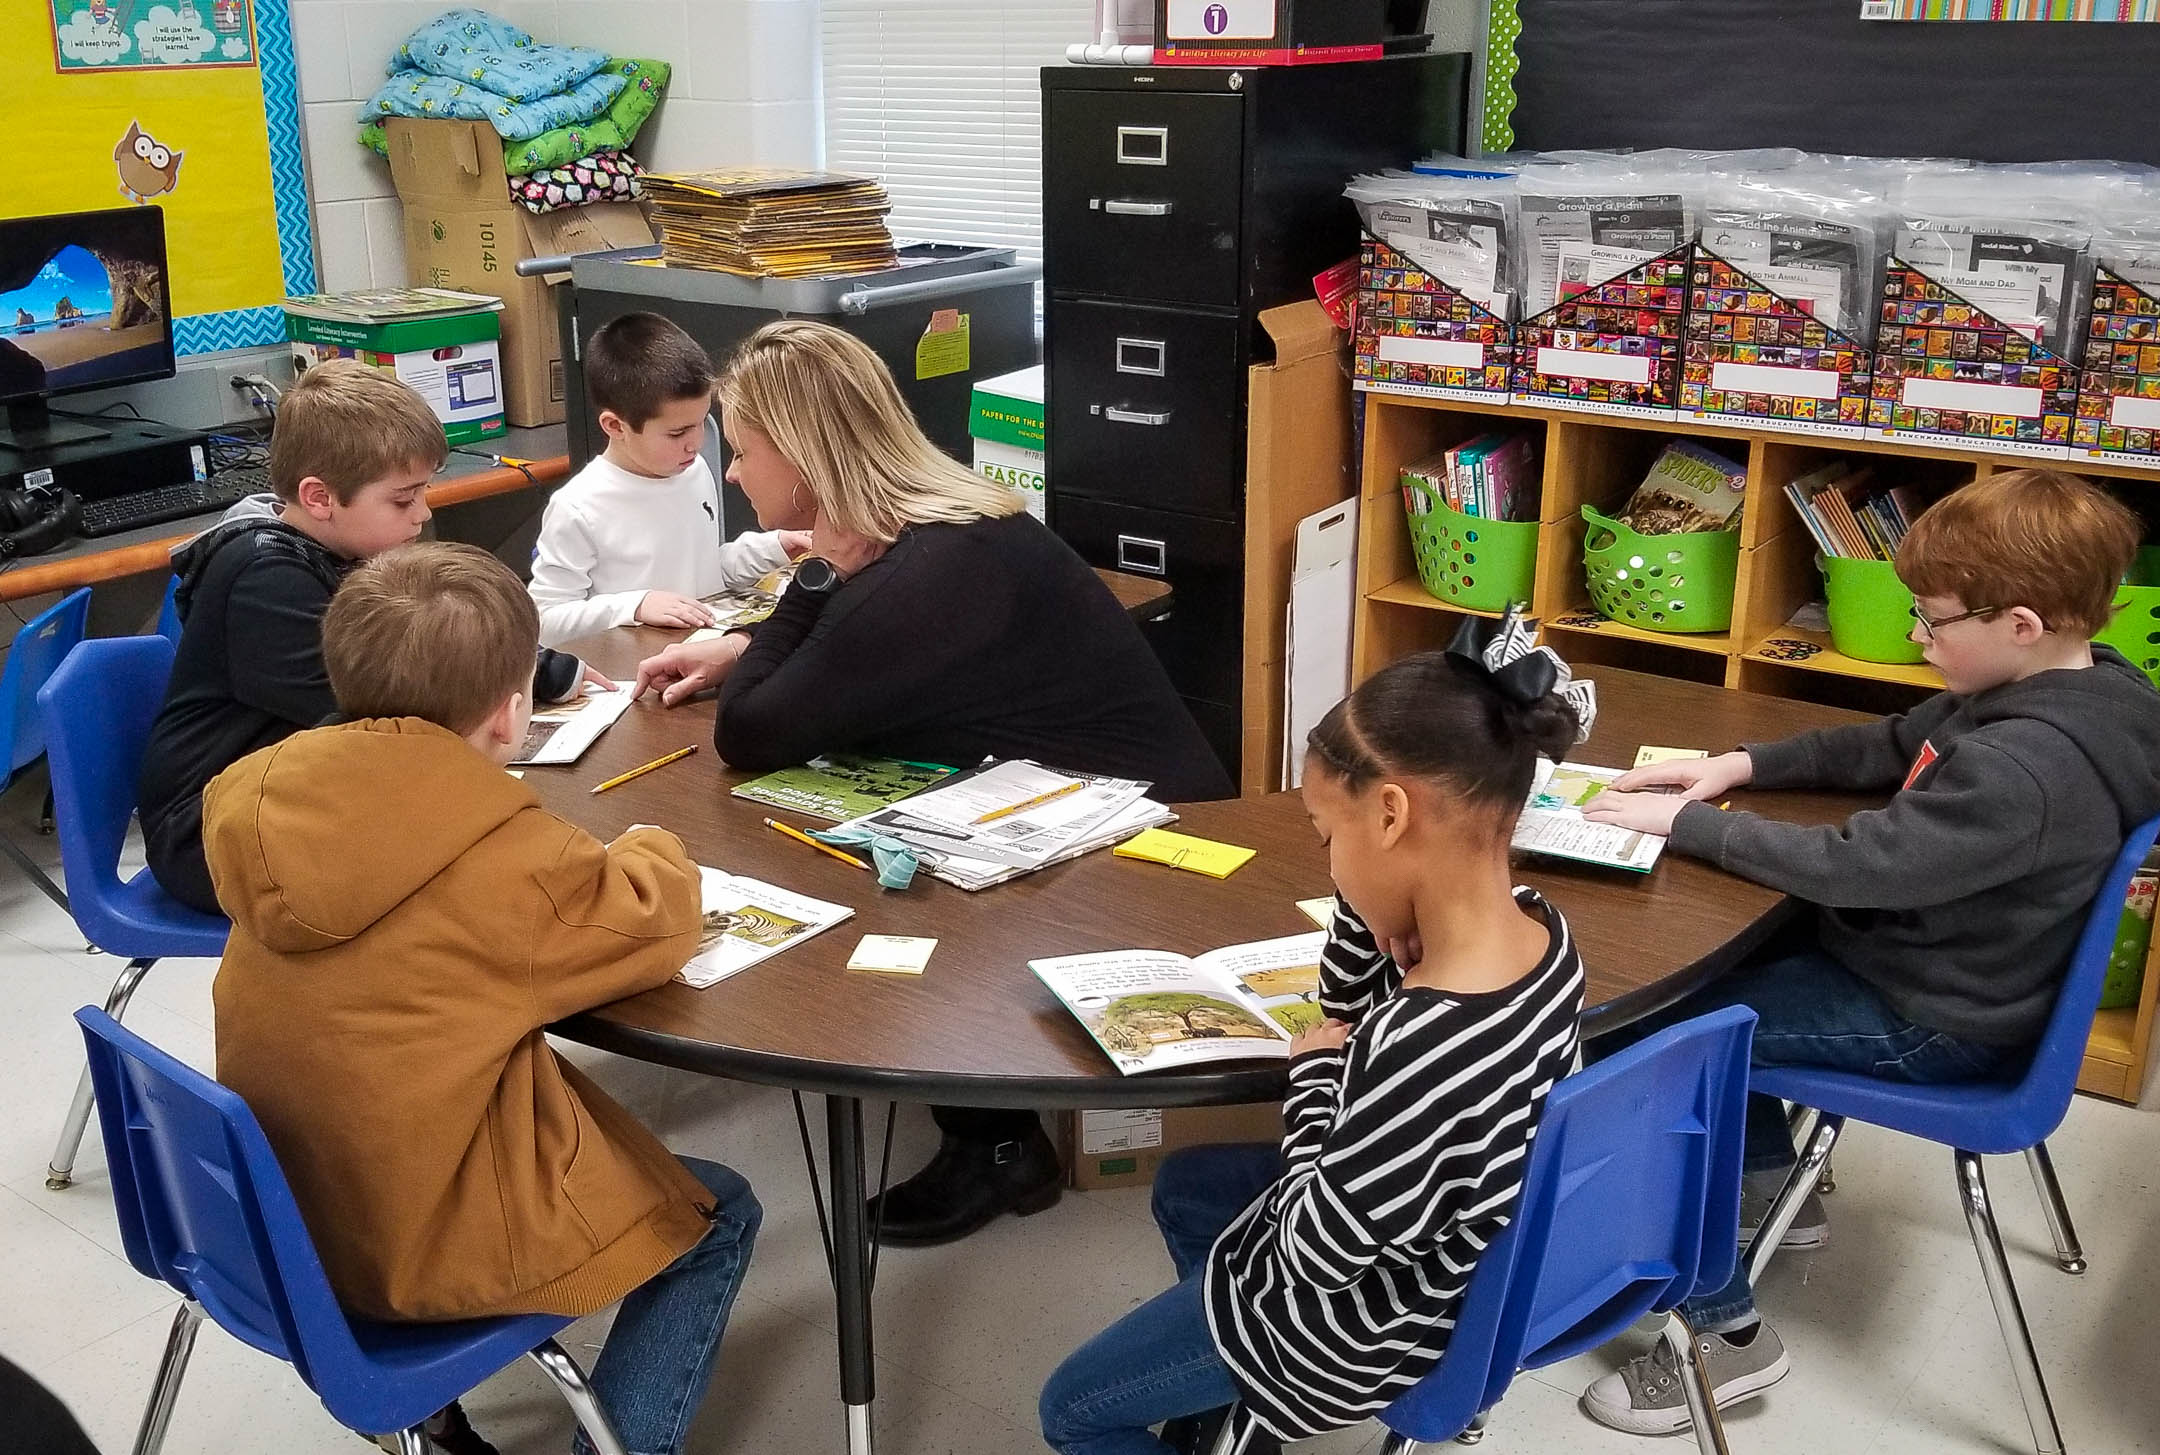 Kara Stevenson delivers instruction during a guided reading lesson. Students are whisper reading independently as Stevenson listens to one student read. Pictured from left are Pembroke Elementary School 1st-graders Garrison Meacham, Anniston Meriwether, John Michael Arivn, Camden McGehee and Aiden Riley. Submitted picture by Jennifer Meacham